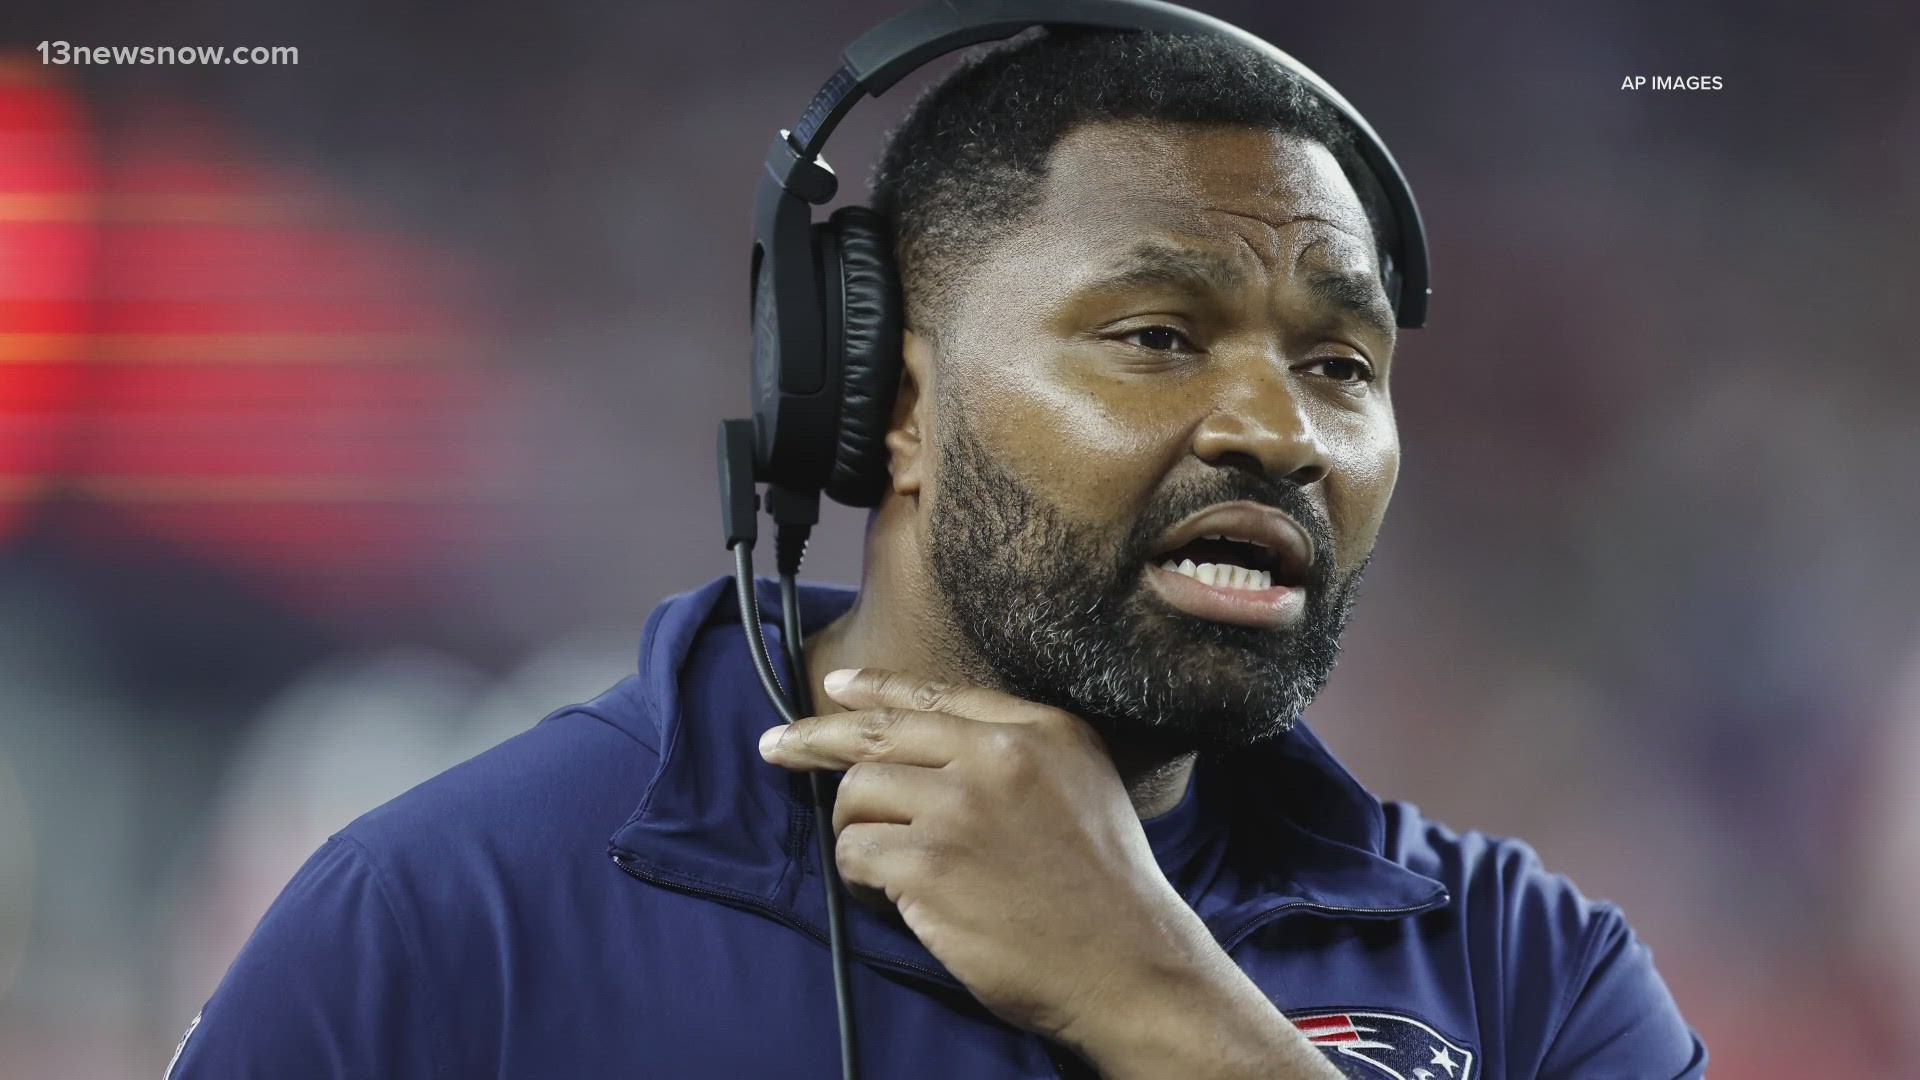 Mayo, a Kecoughtan High School graduate, began his coaching career in 2019 as a linebackers coach with the New England Patriots, according to the team's website.